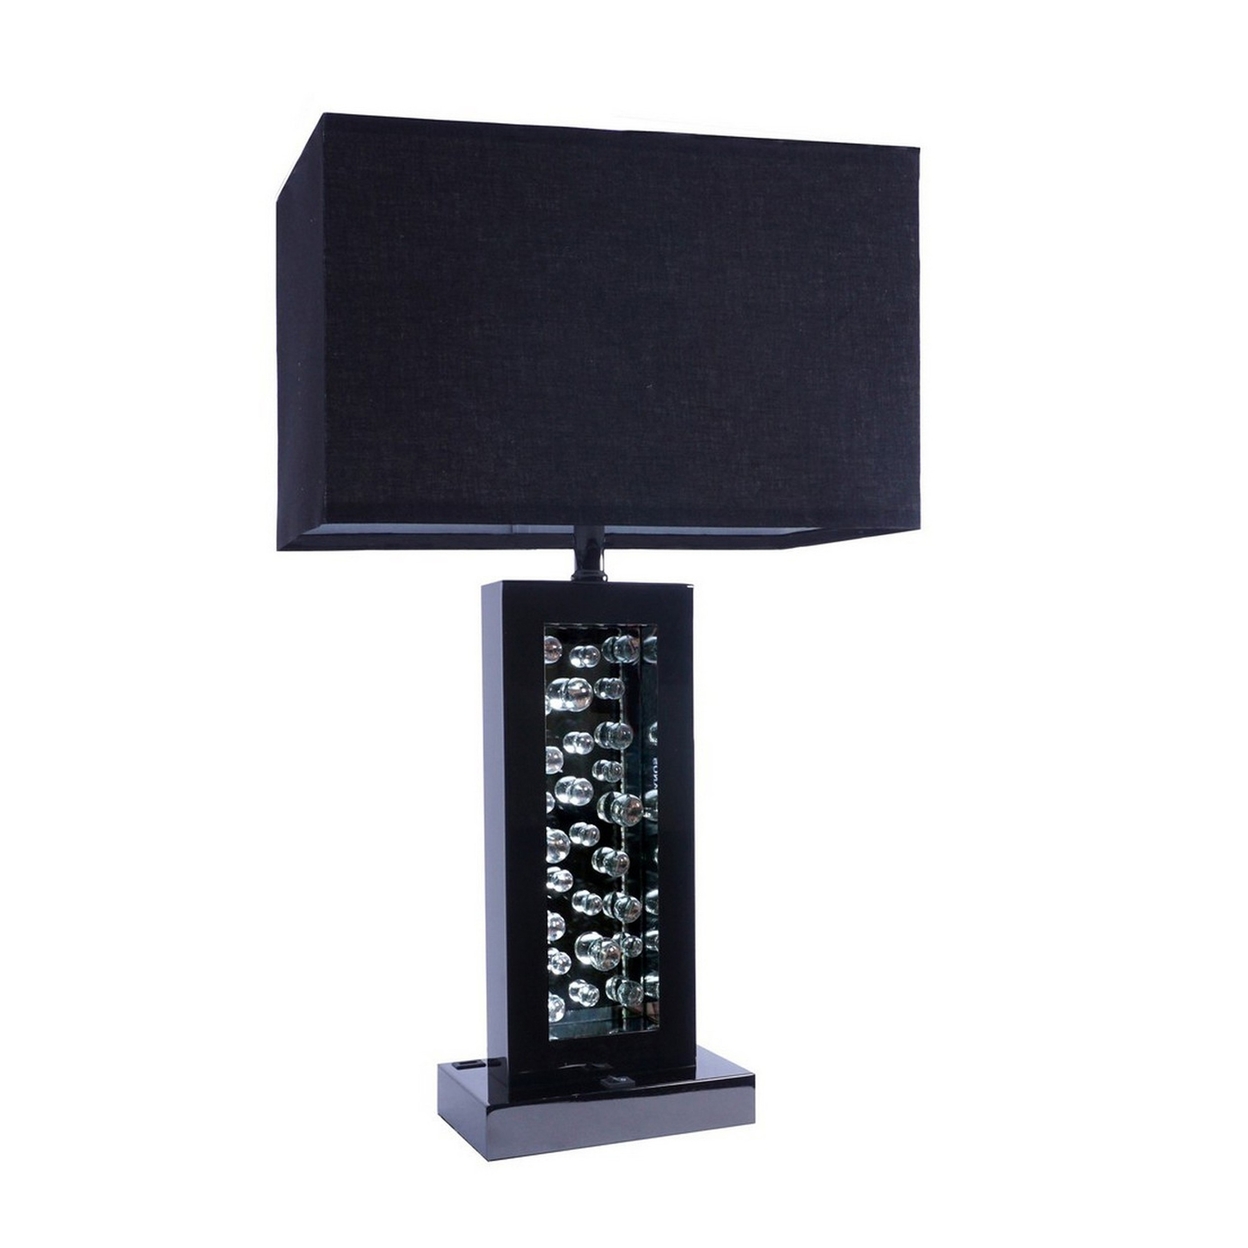 28 Inch Nickel Table Lamp, Black Fabric Shade, Glass Panel And LED Accents- Saltoro Sherpi